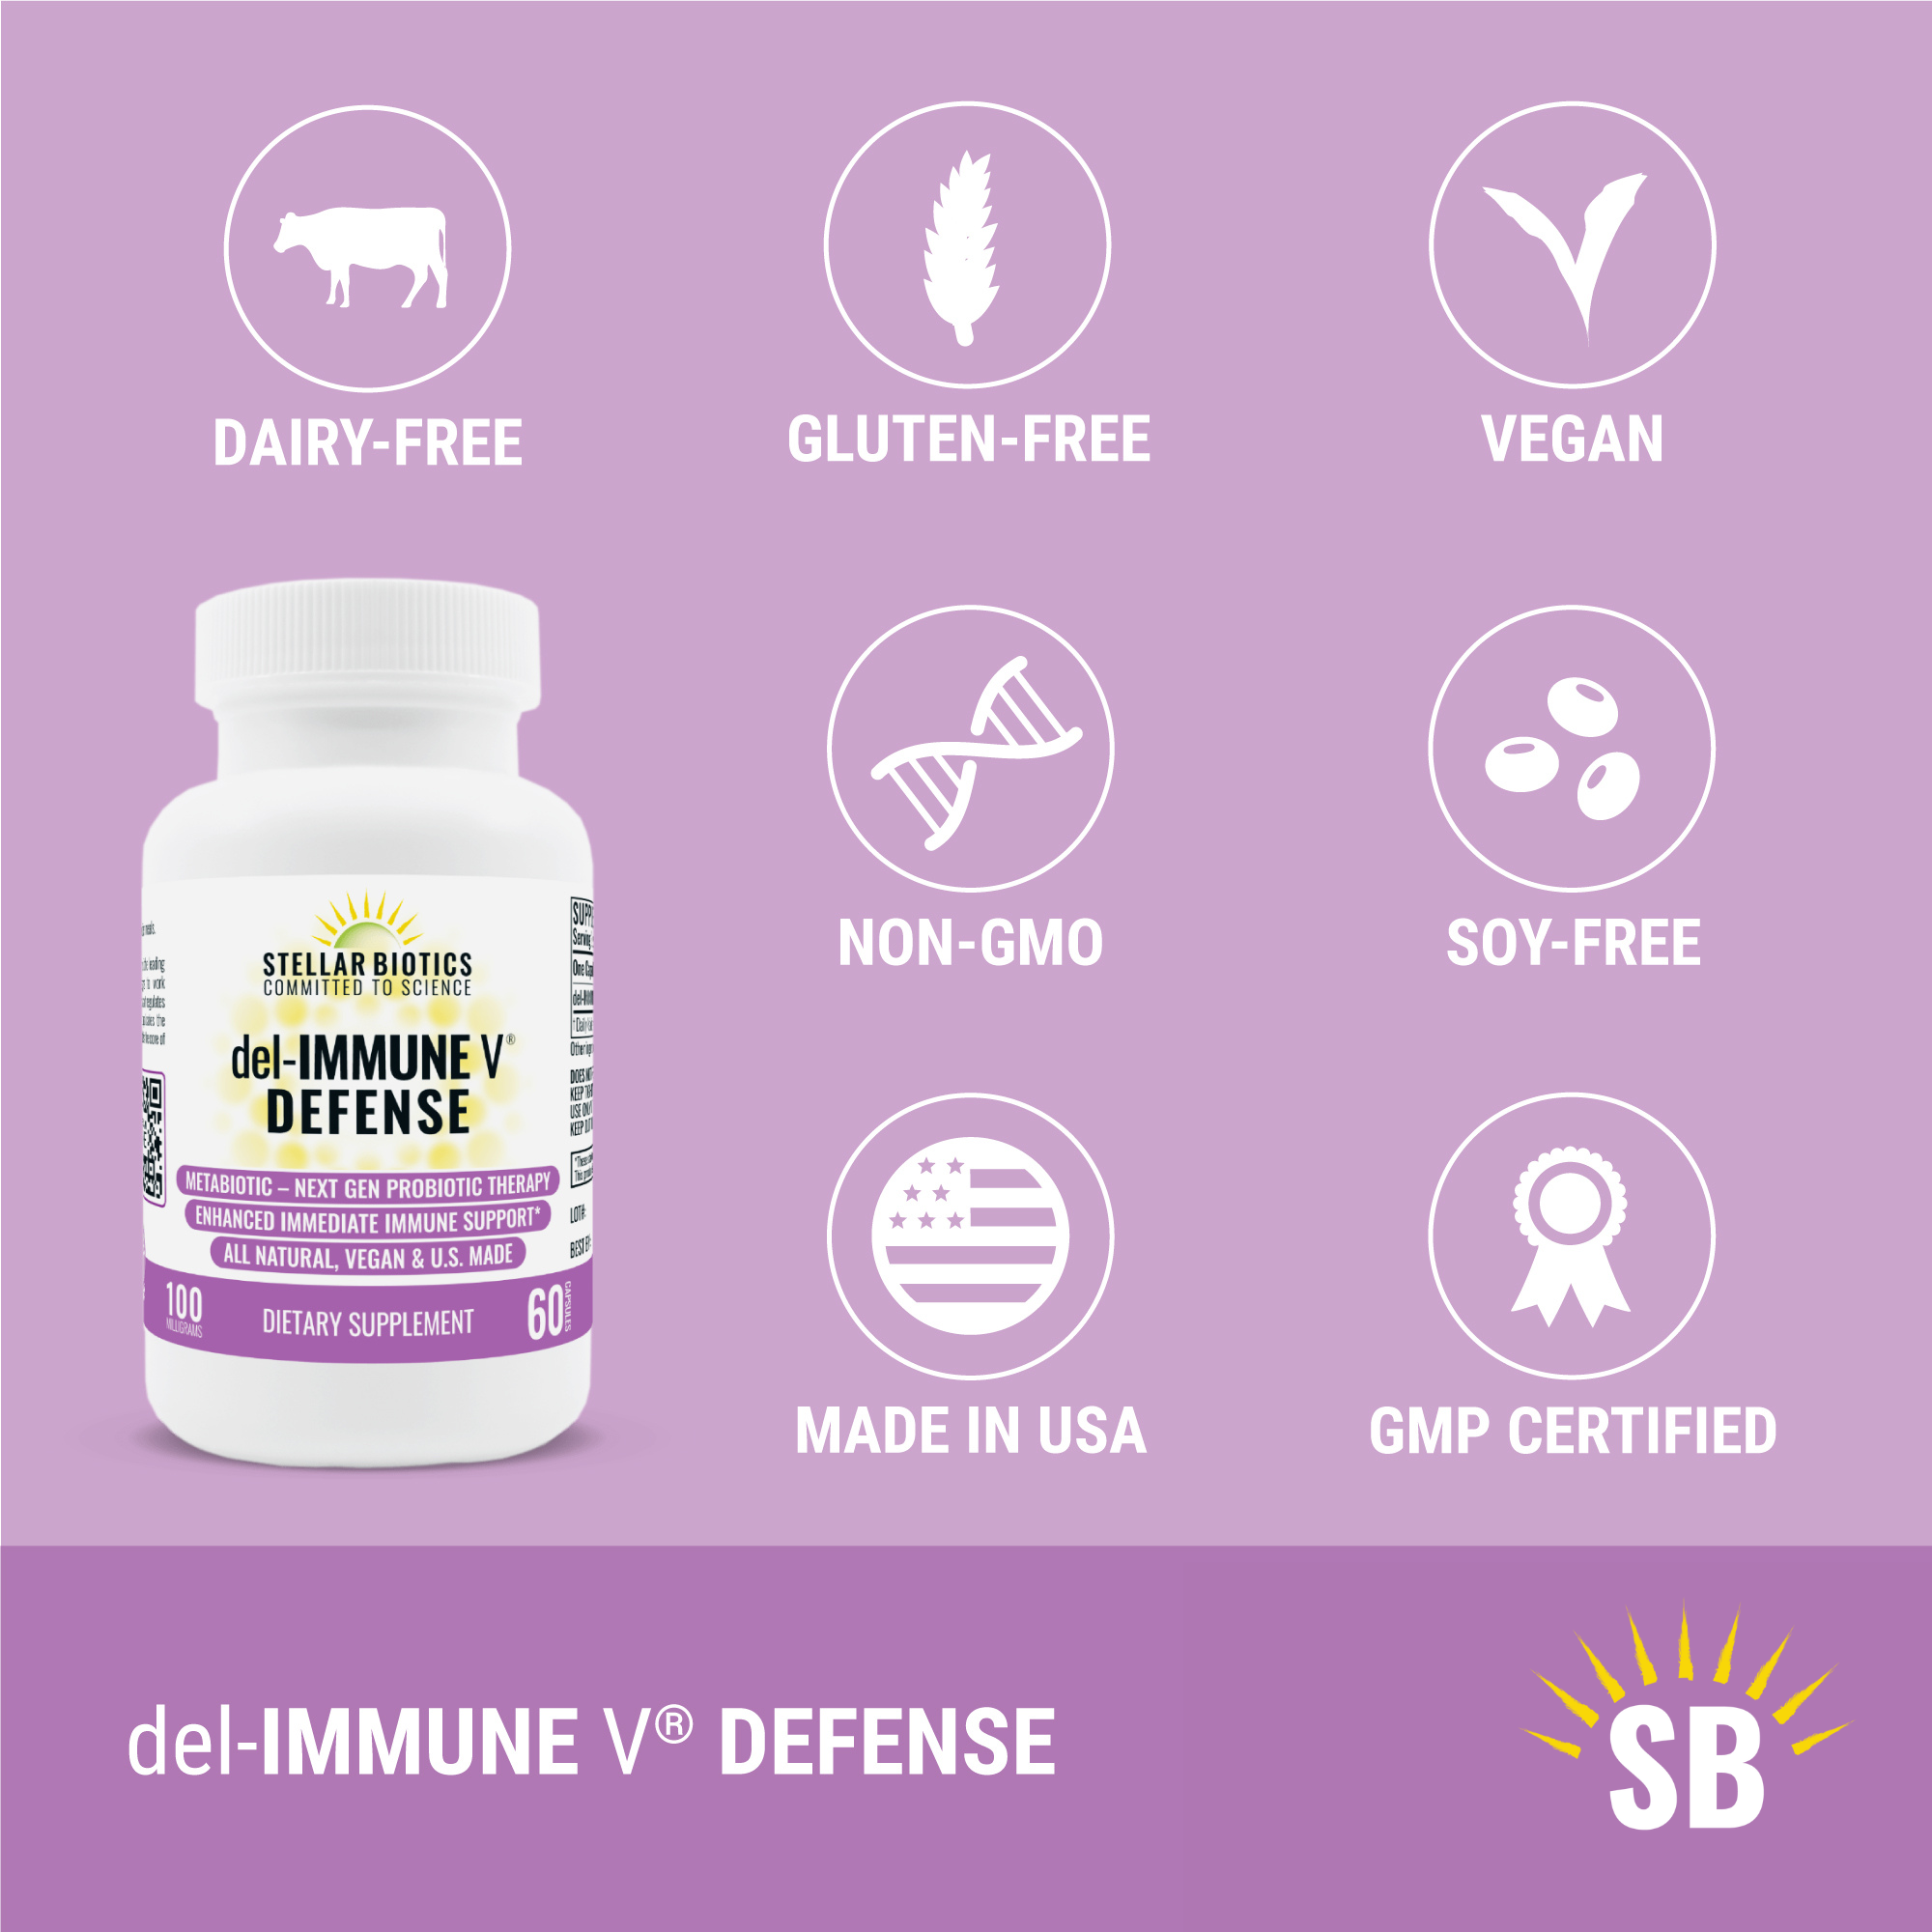 del-IMMUNE V® DEFENSE is All-Natural, Non-GMO, Dairy-Free, Gluten-Free, Soy-Free, GMP Certified, Made in USA